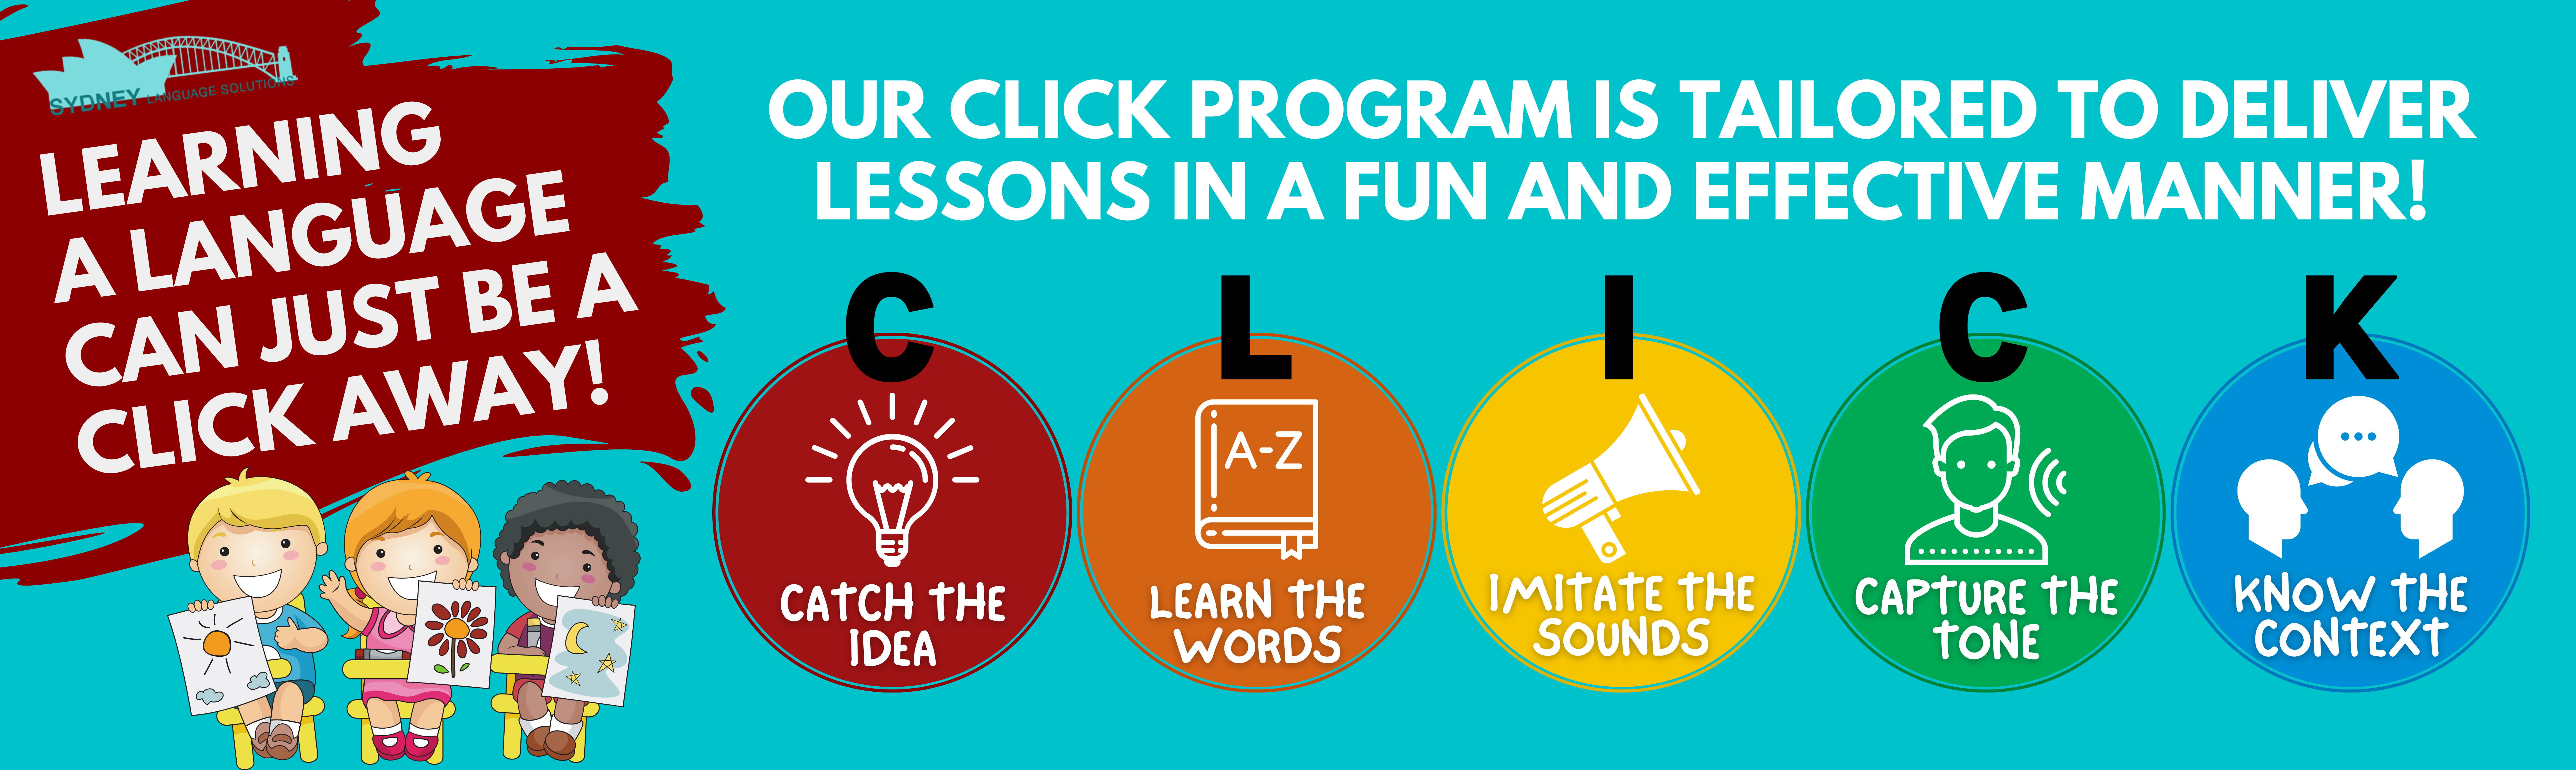 Learning a Language can just be a click away!